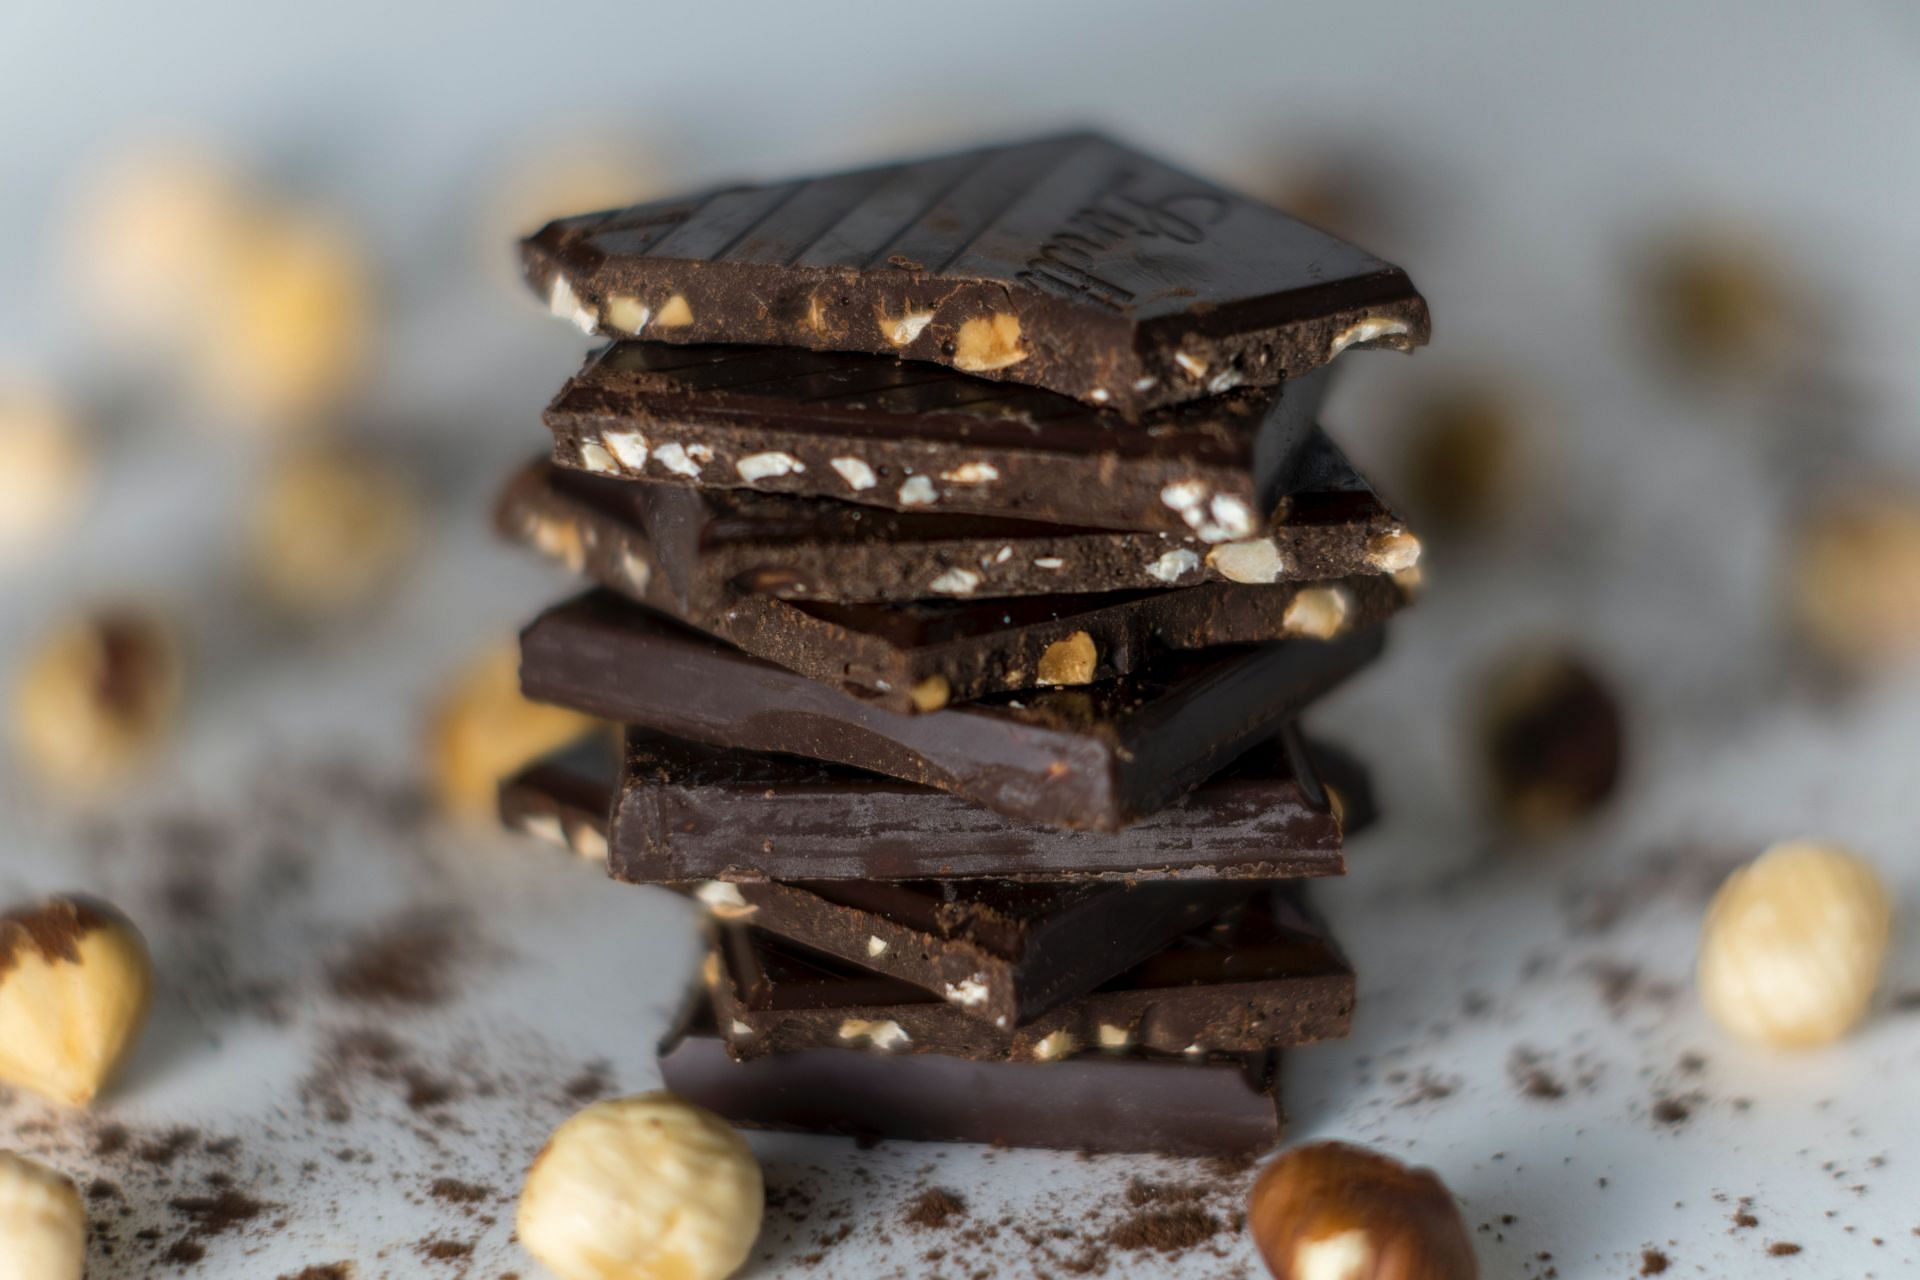 Cocoa can improve memory and cognition (Image via Unsplash/Amirali Mirhashemian)